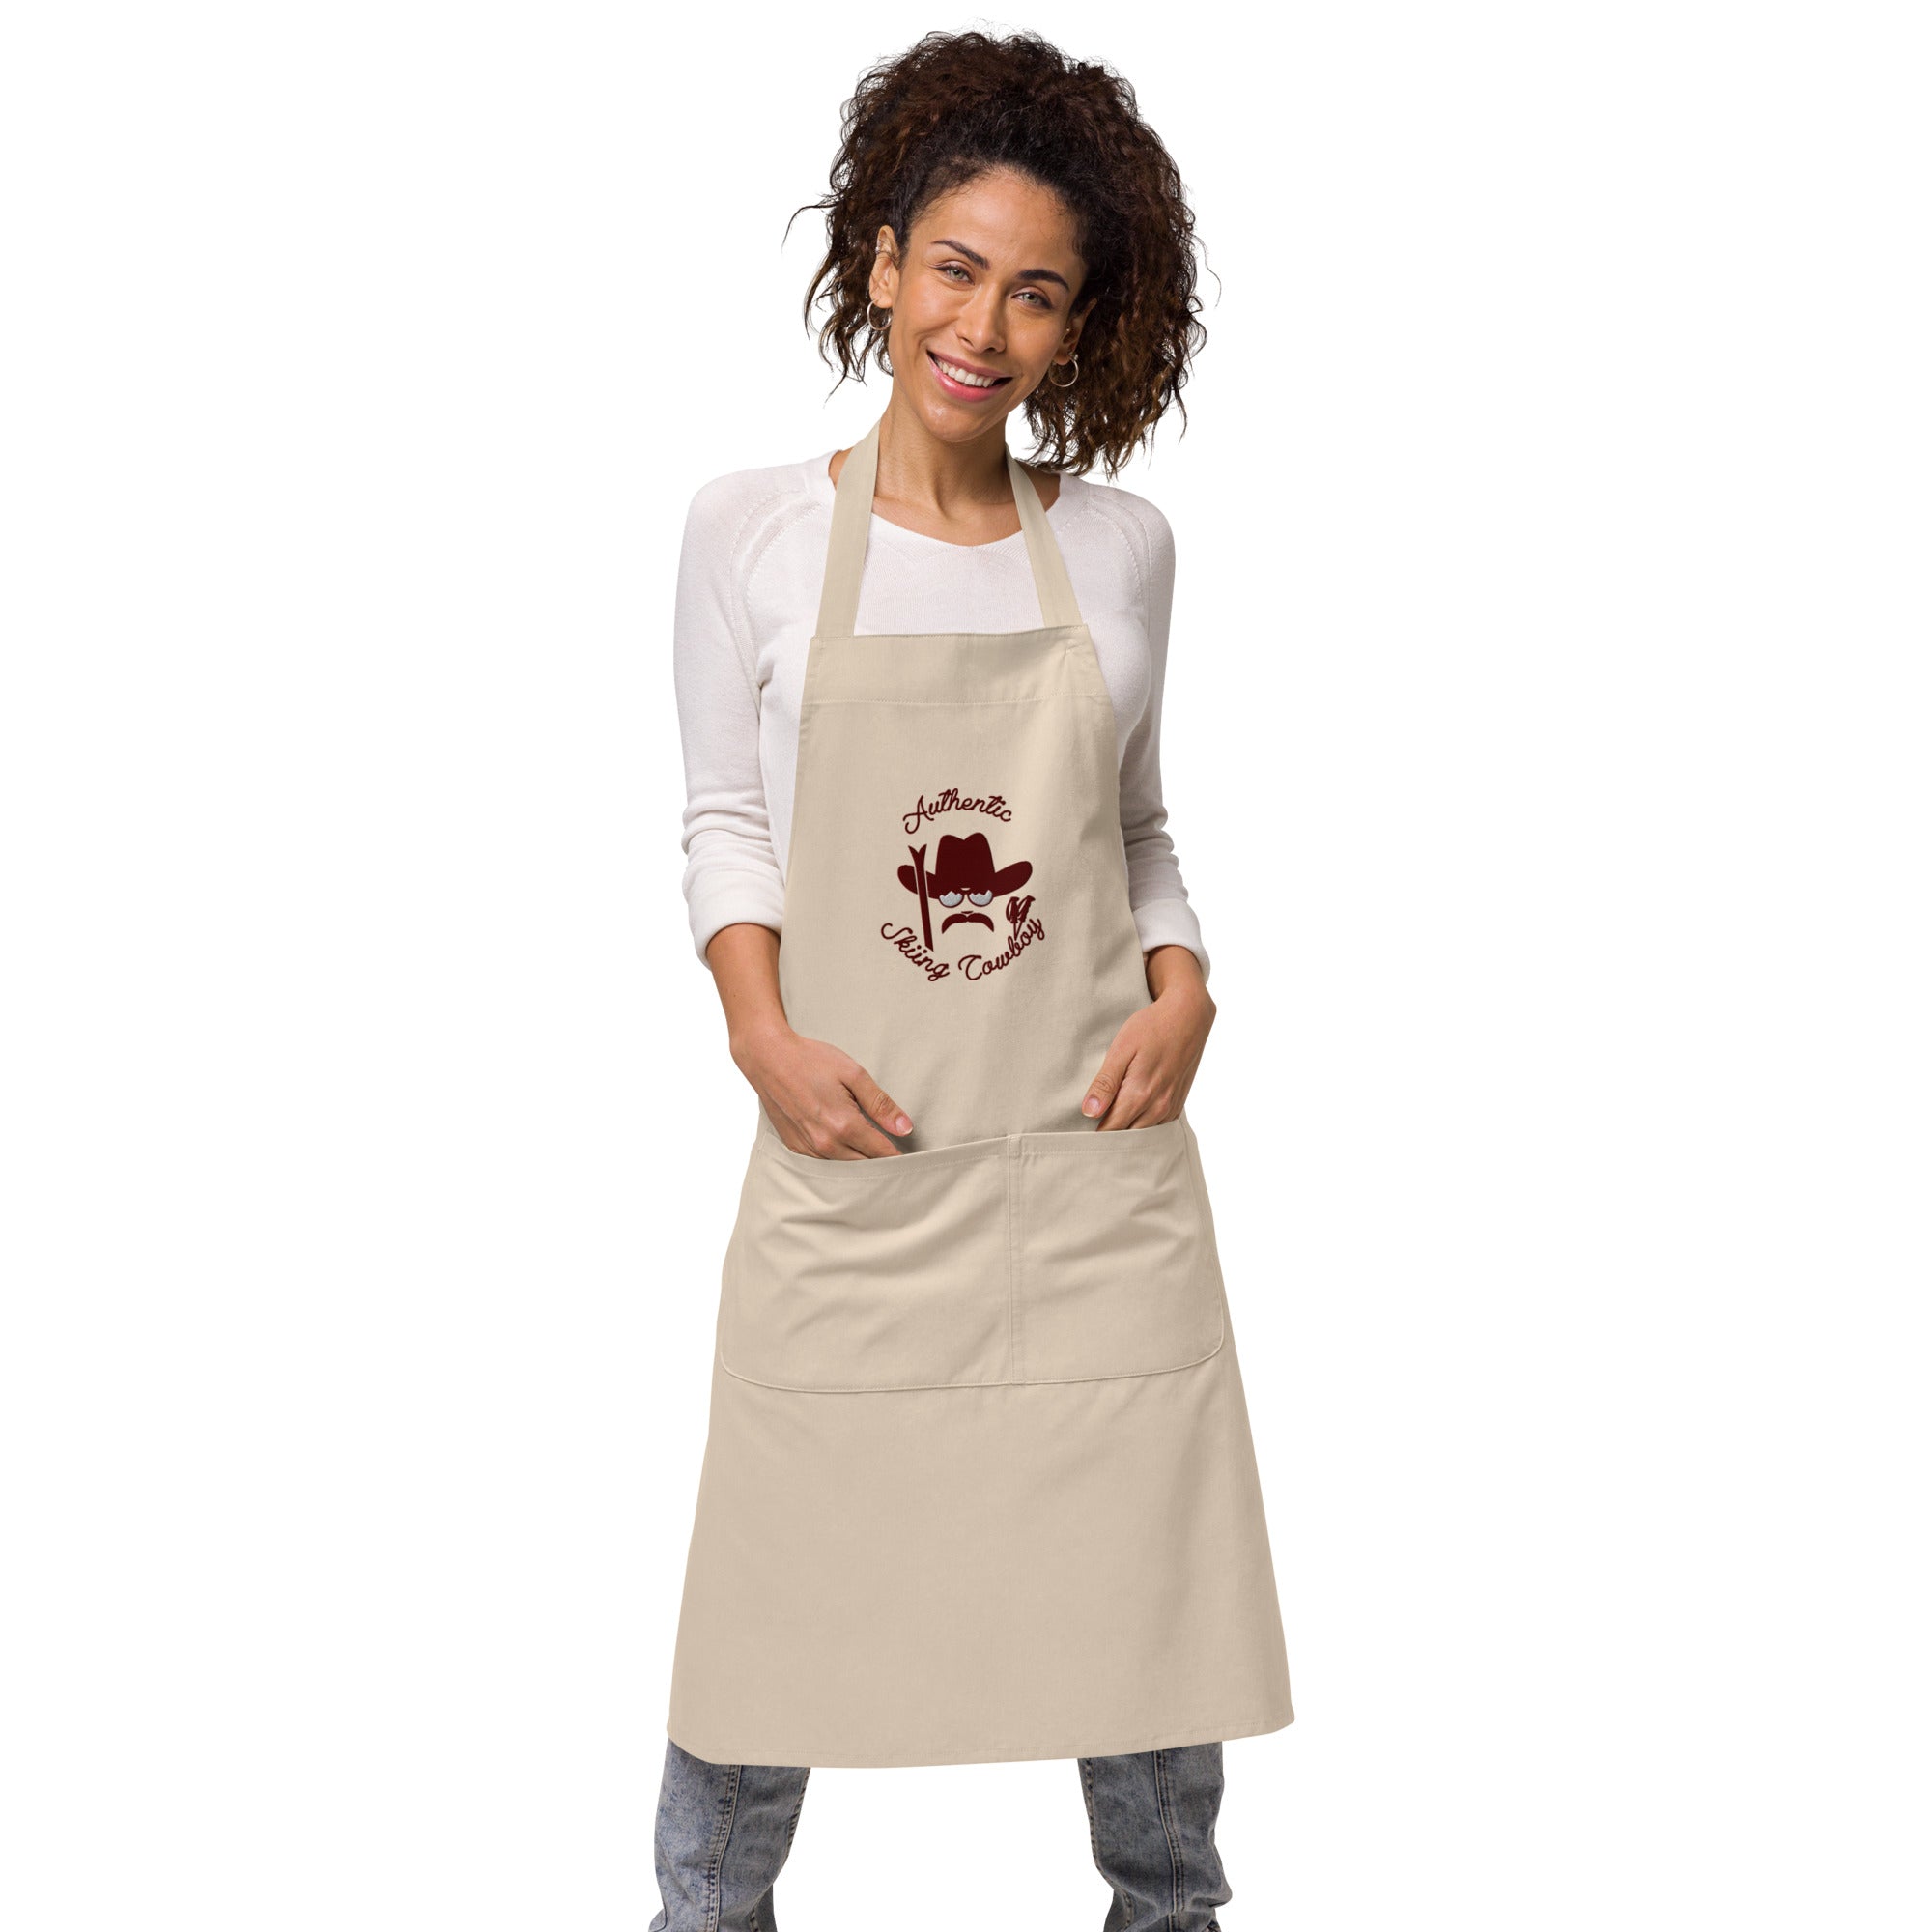 Organic cotton apron Authentic Skiing Cowboy large brown embroidered pattern